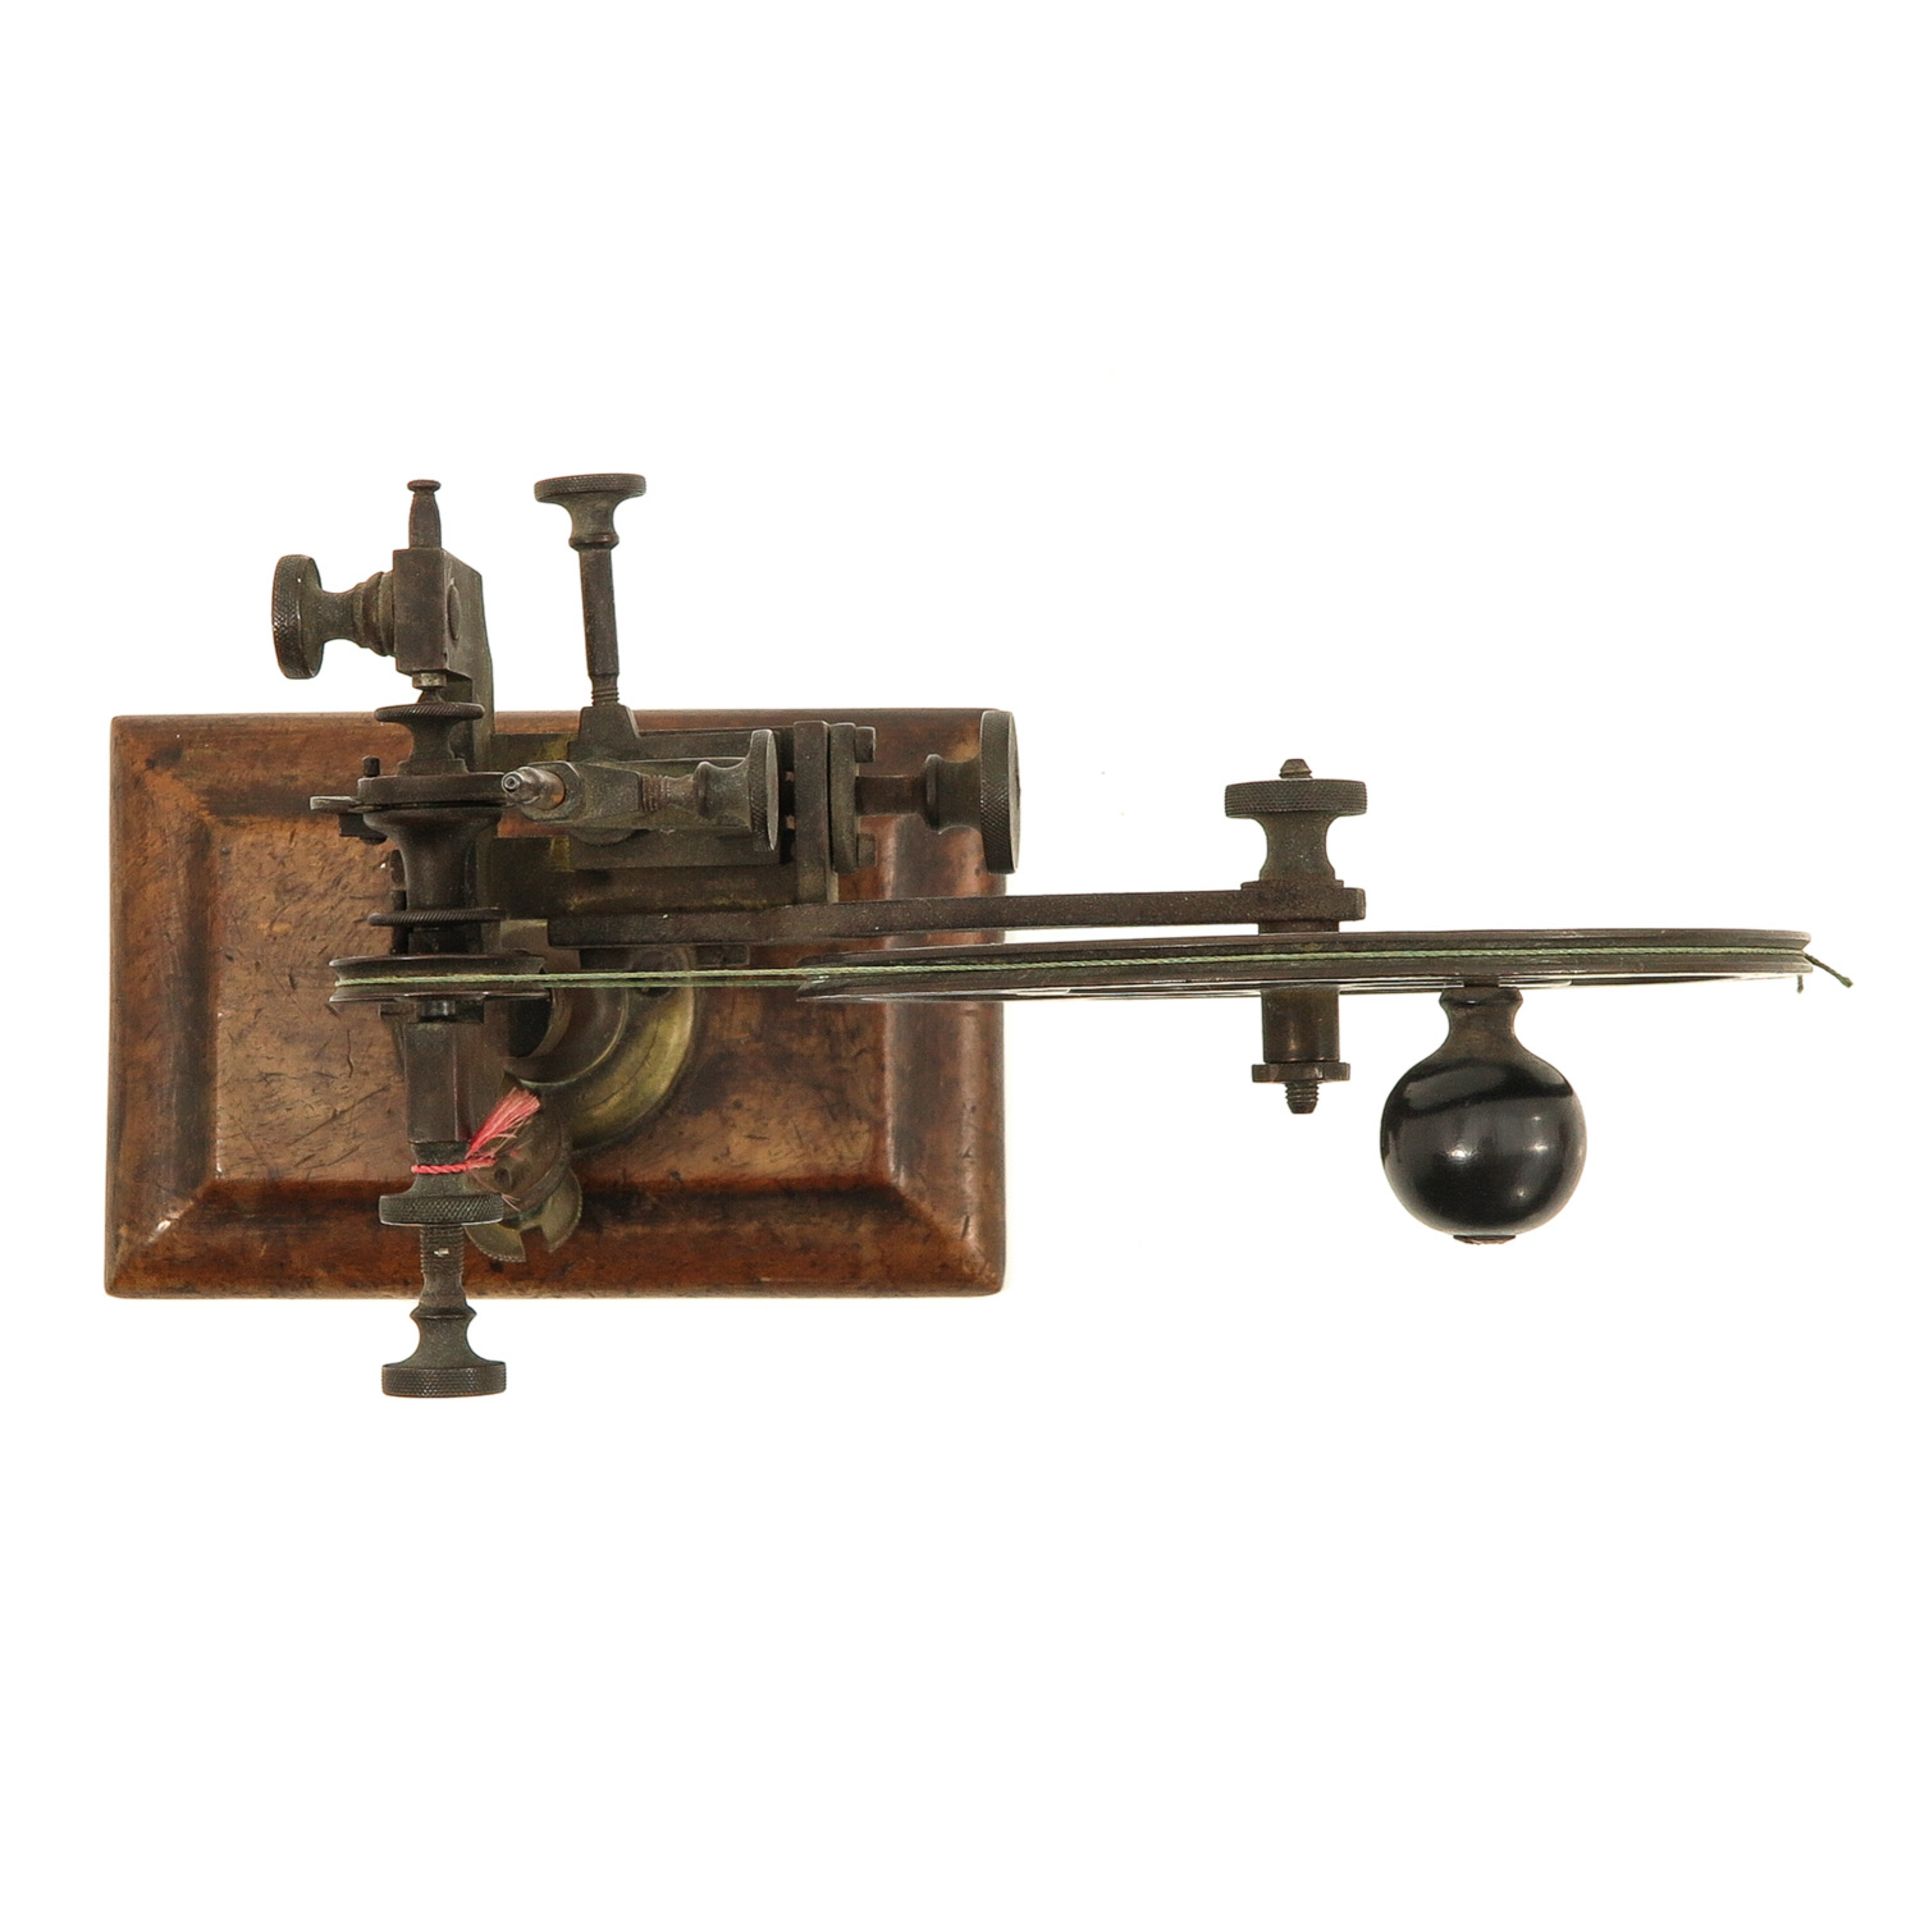 A Watch Makers Machine or Arrondissement Machine - Image 6 of 8